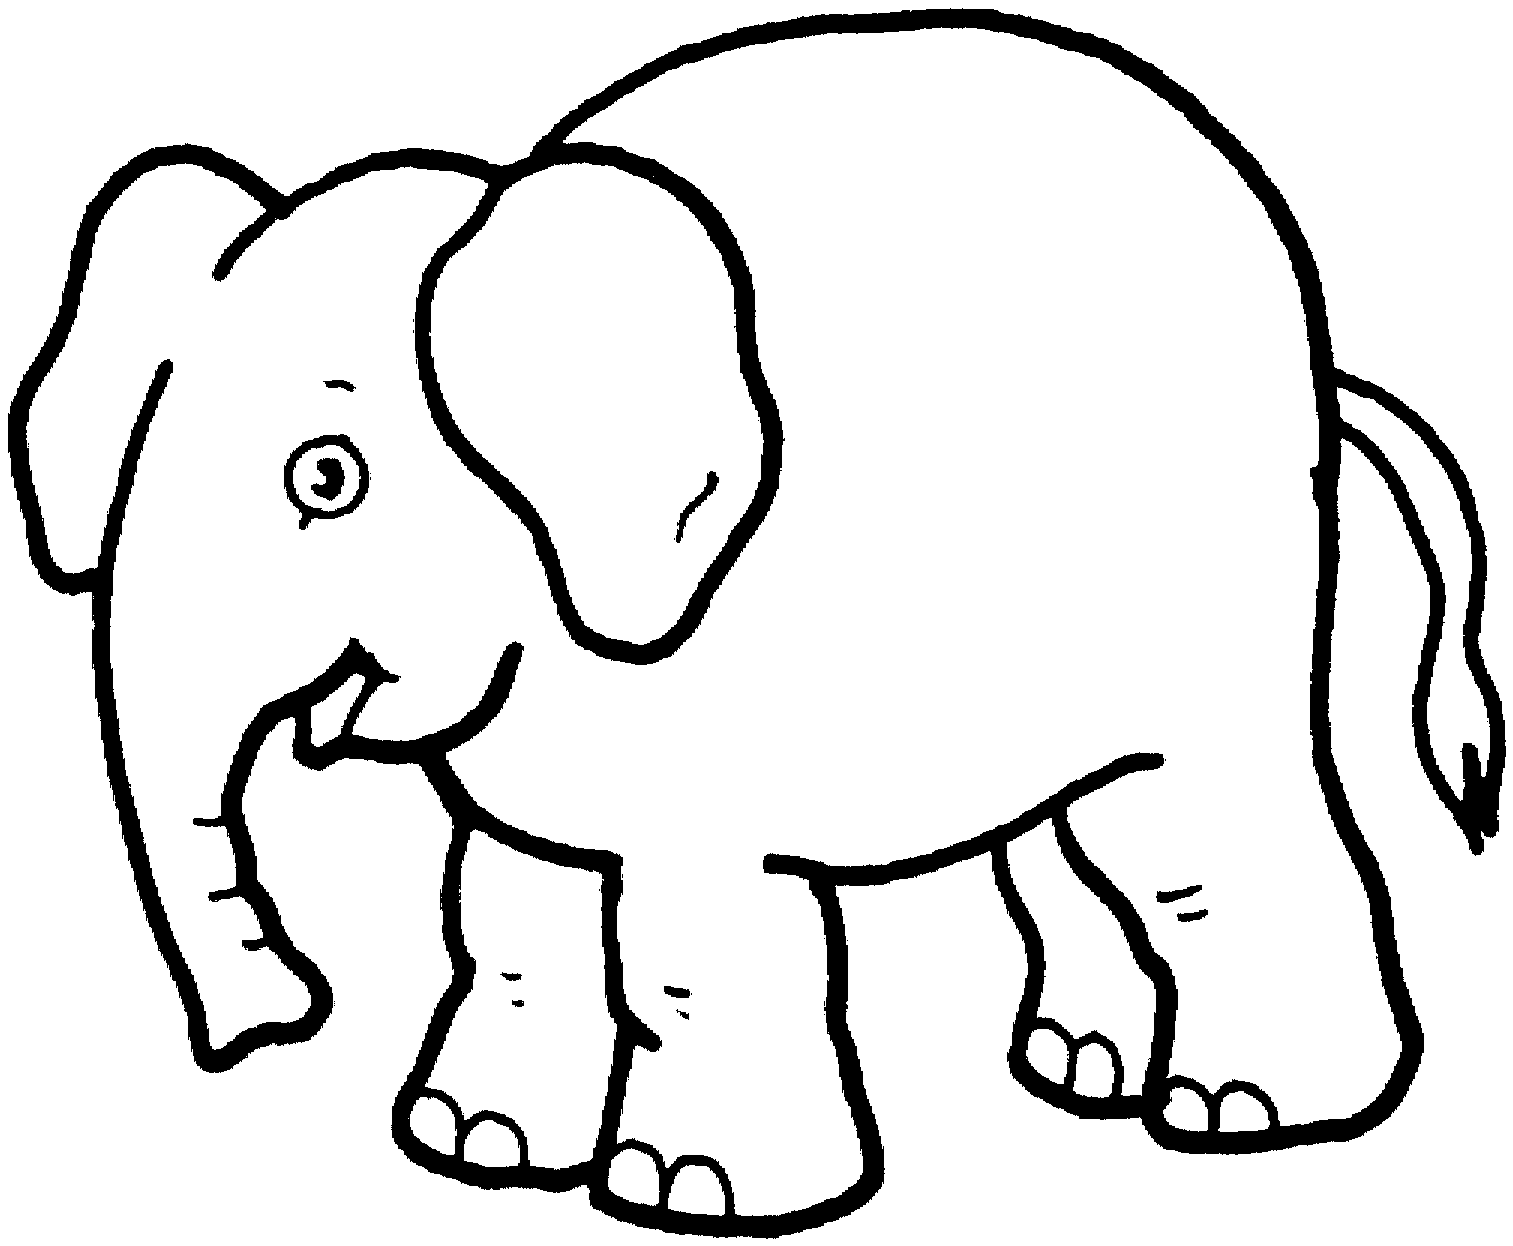 traceable elephant 5 trace the lines how to draw an elephant howstuffworks traceable elephant 